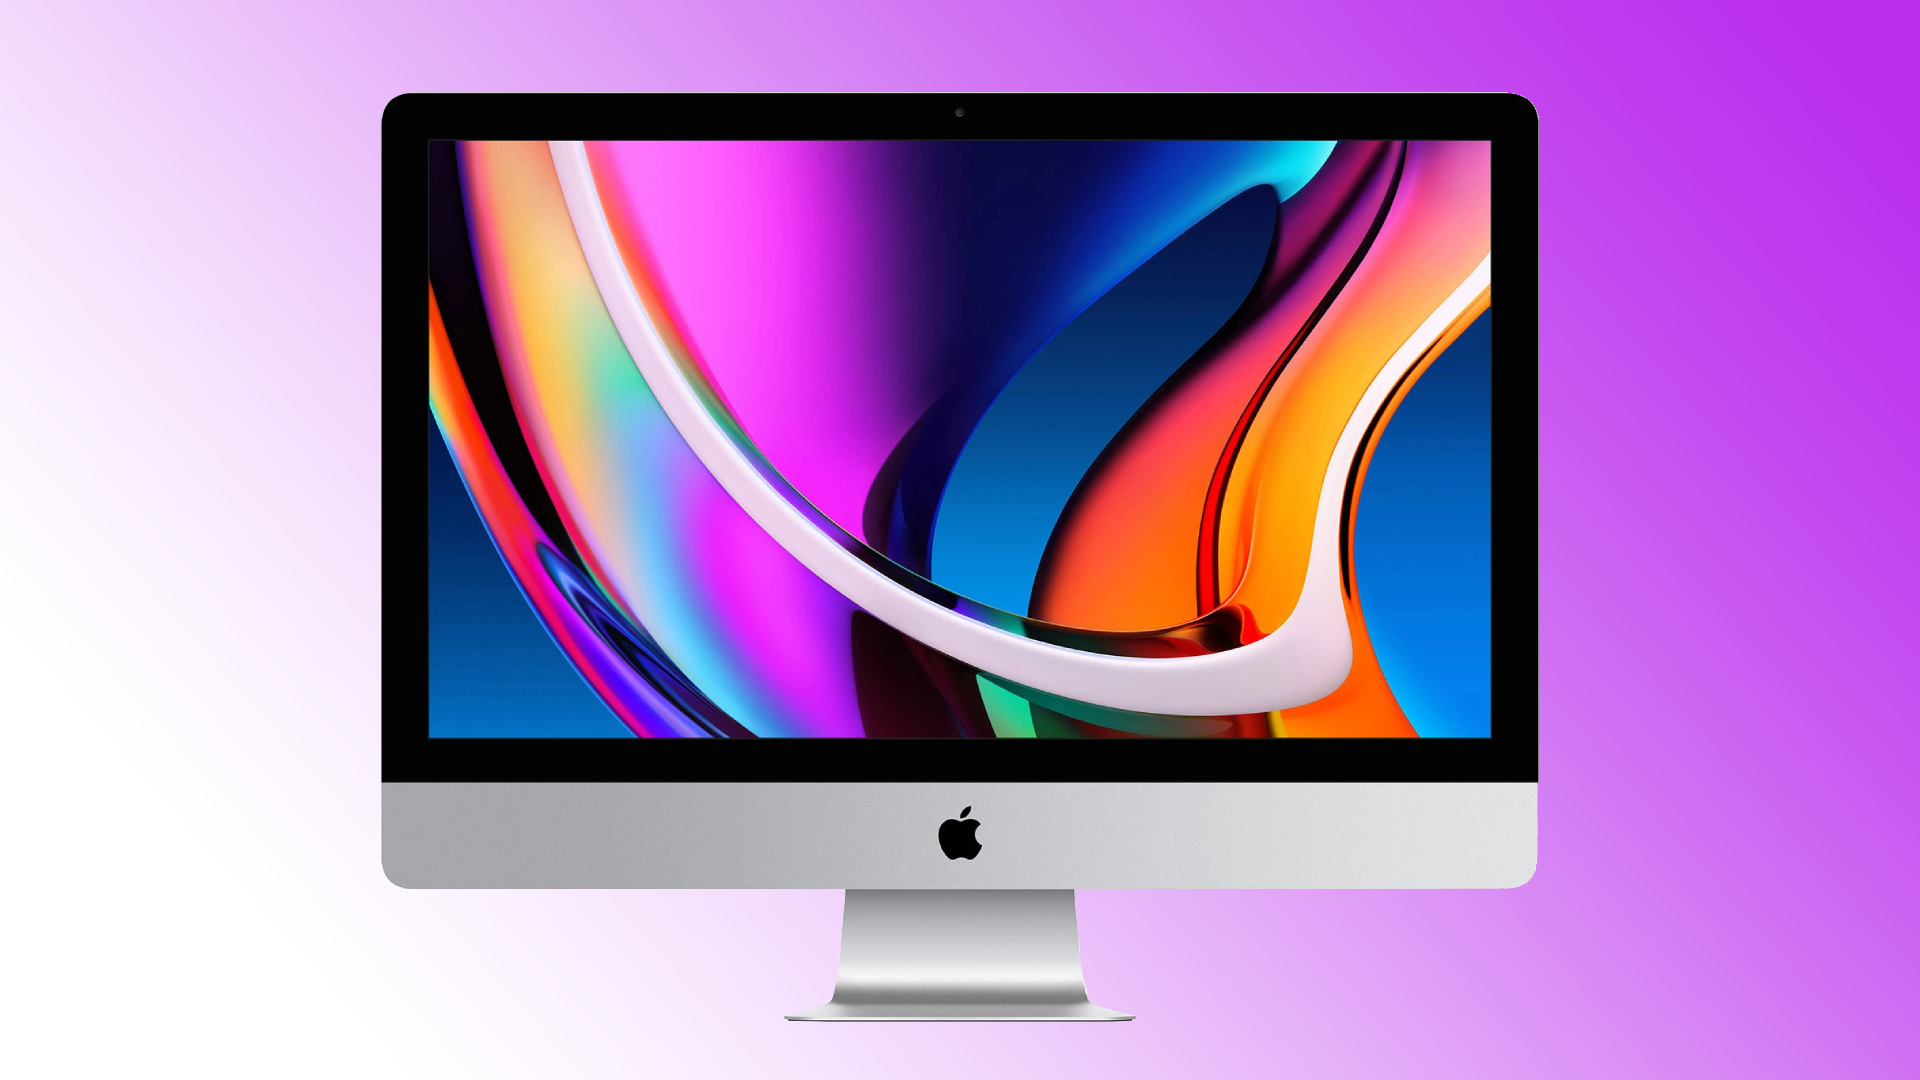 Apple is preparing an updated monitor lineup